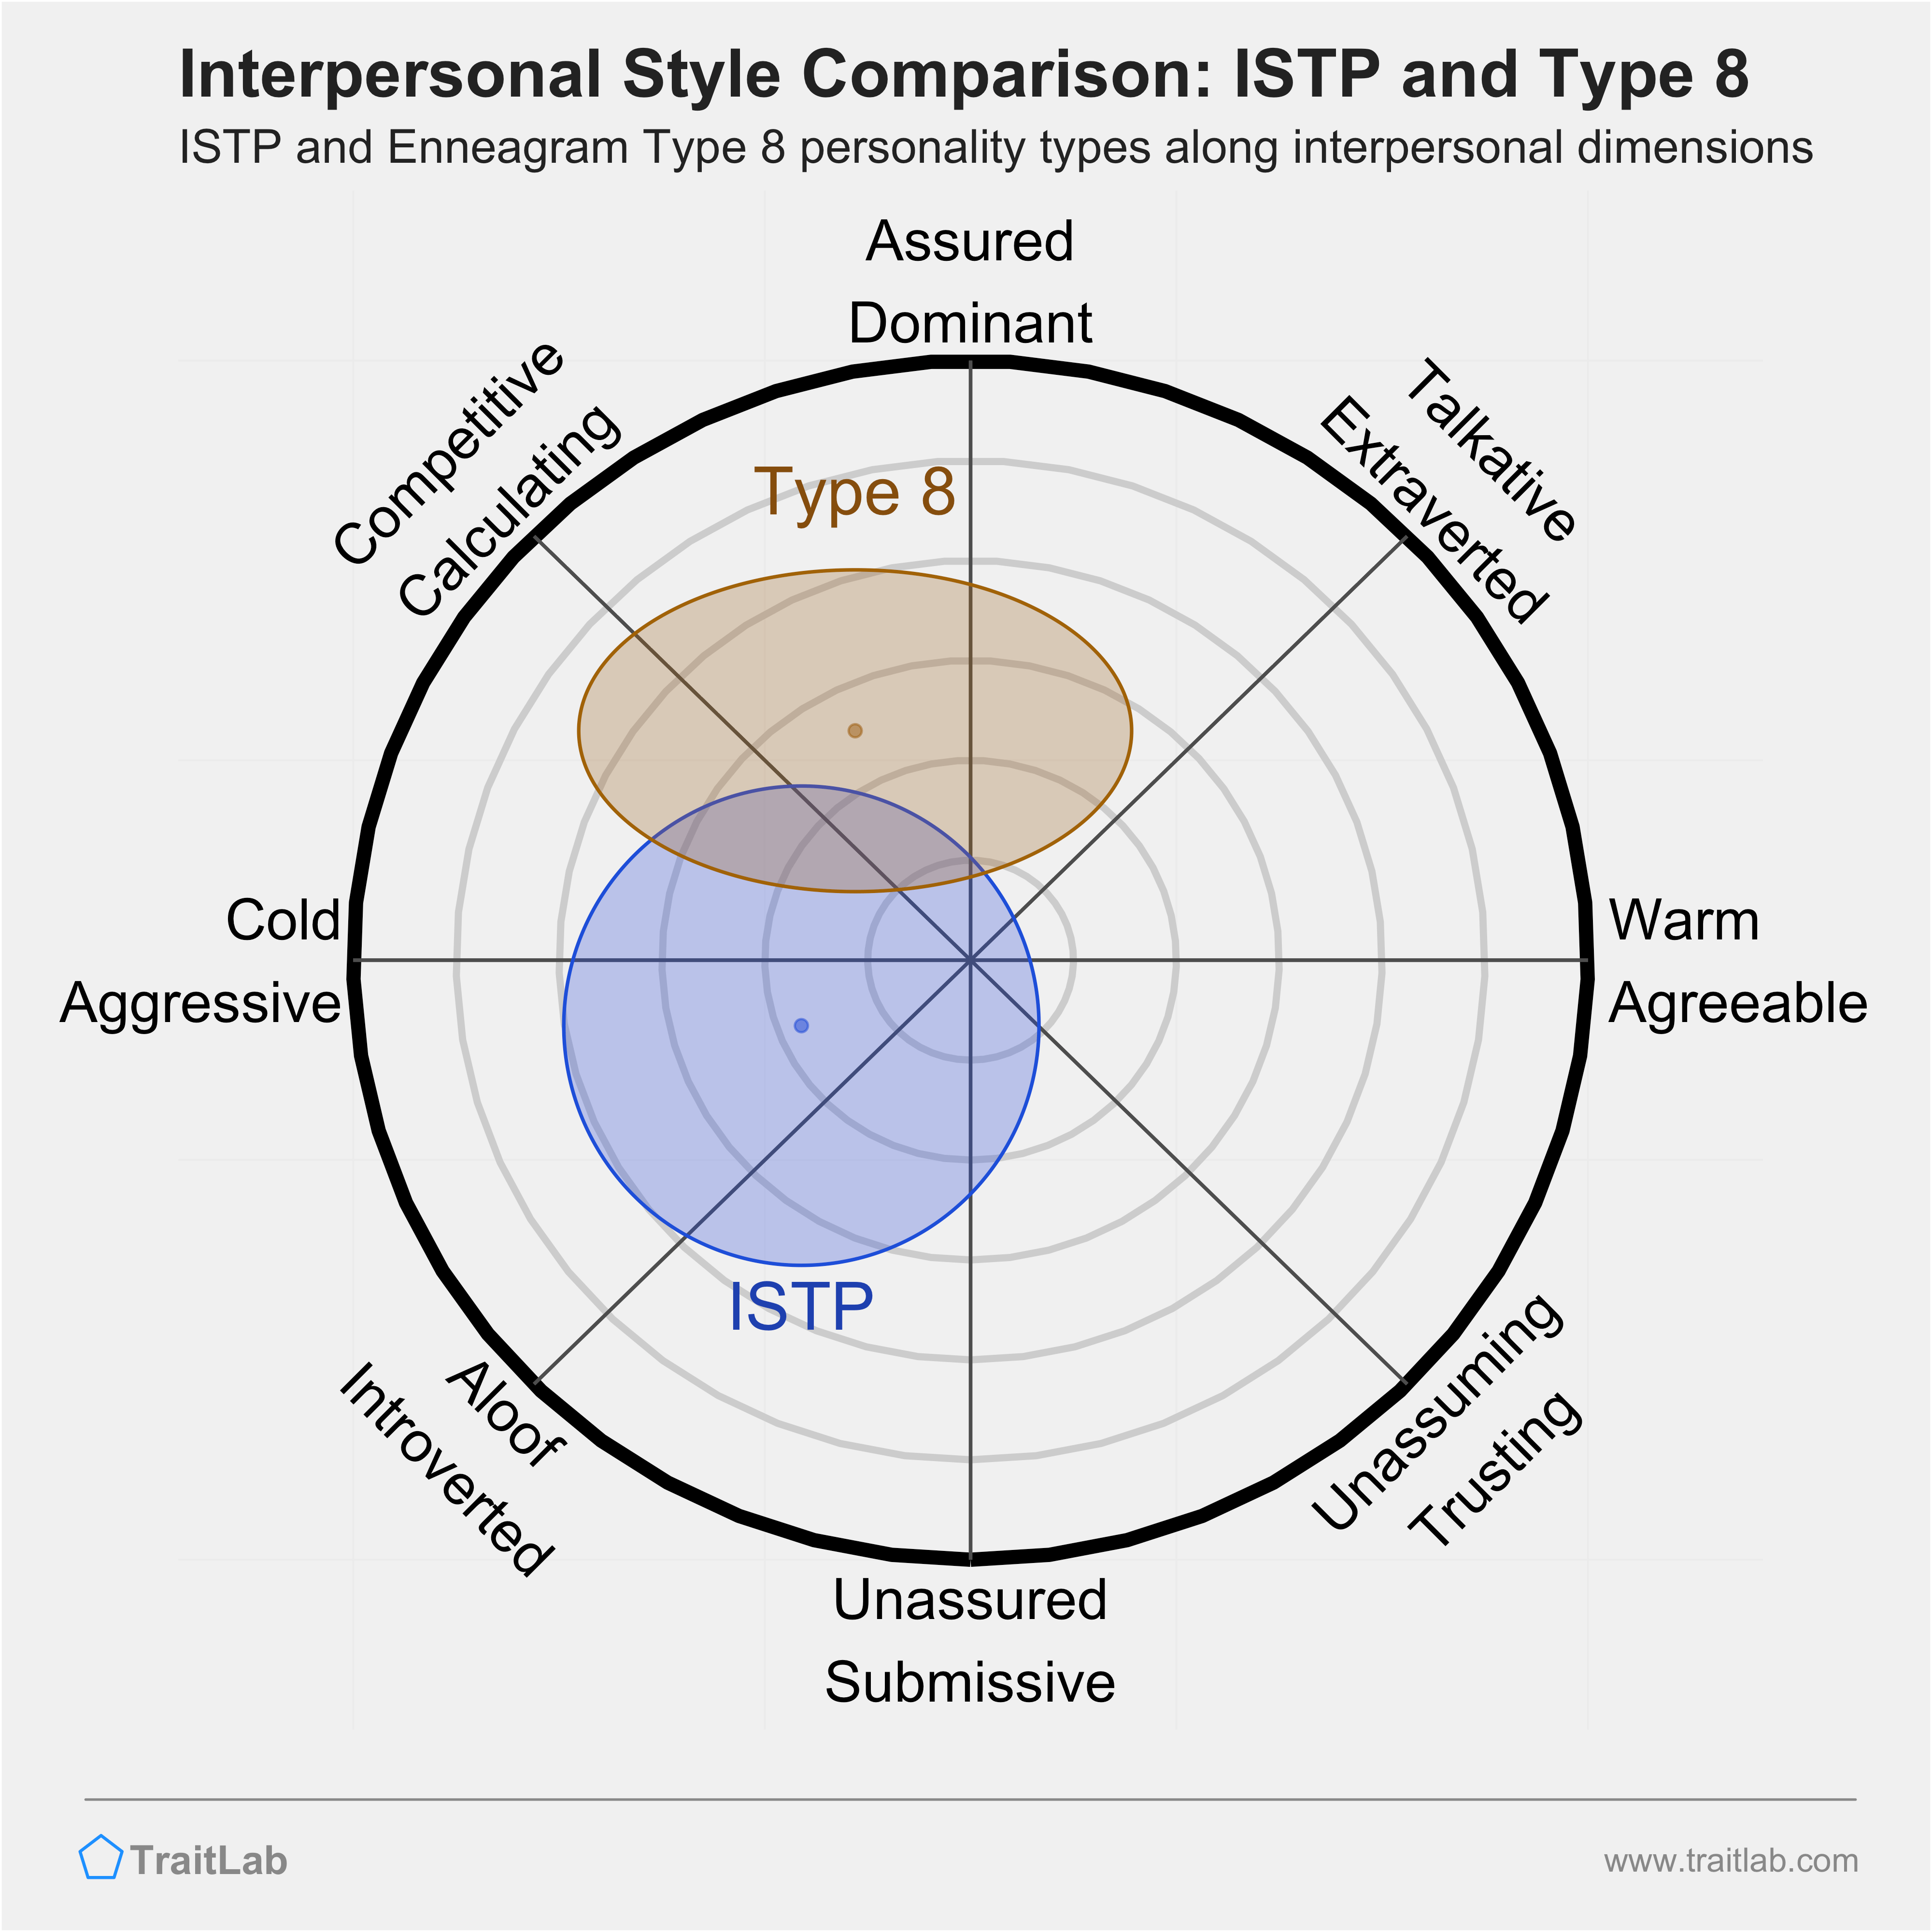 Enneagram ISTP and Type 8 comparison across interpersonal dimensions